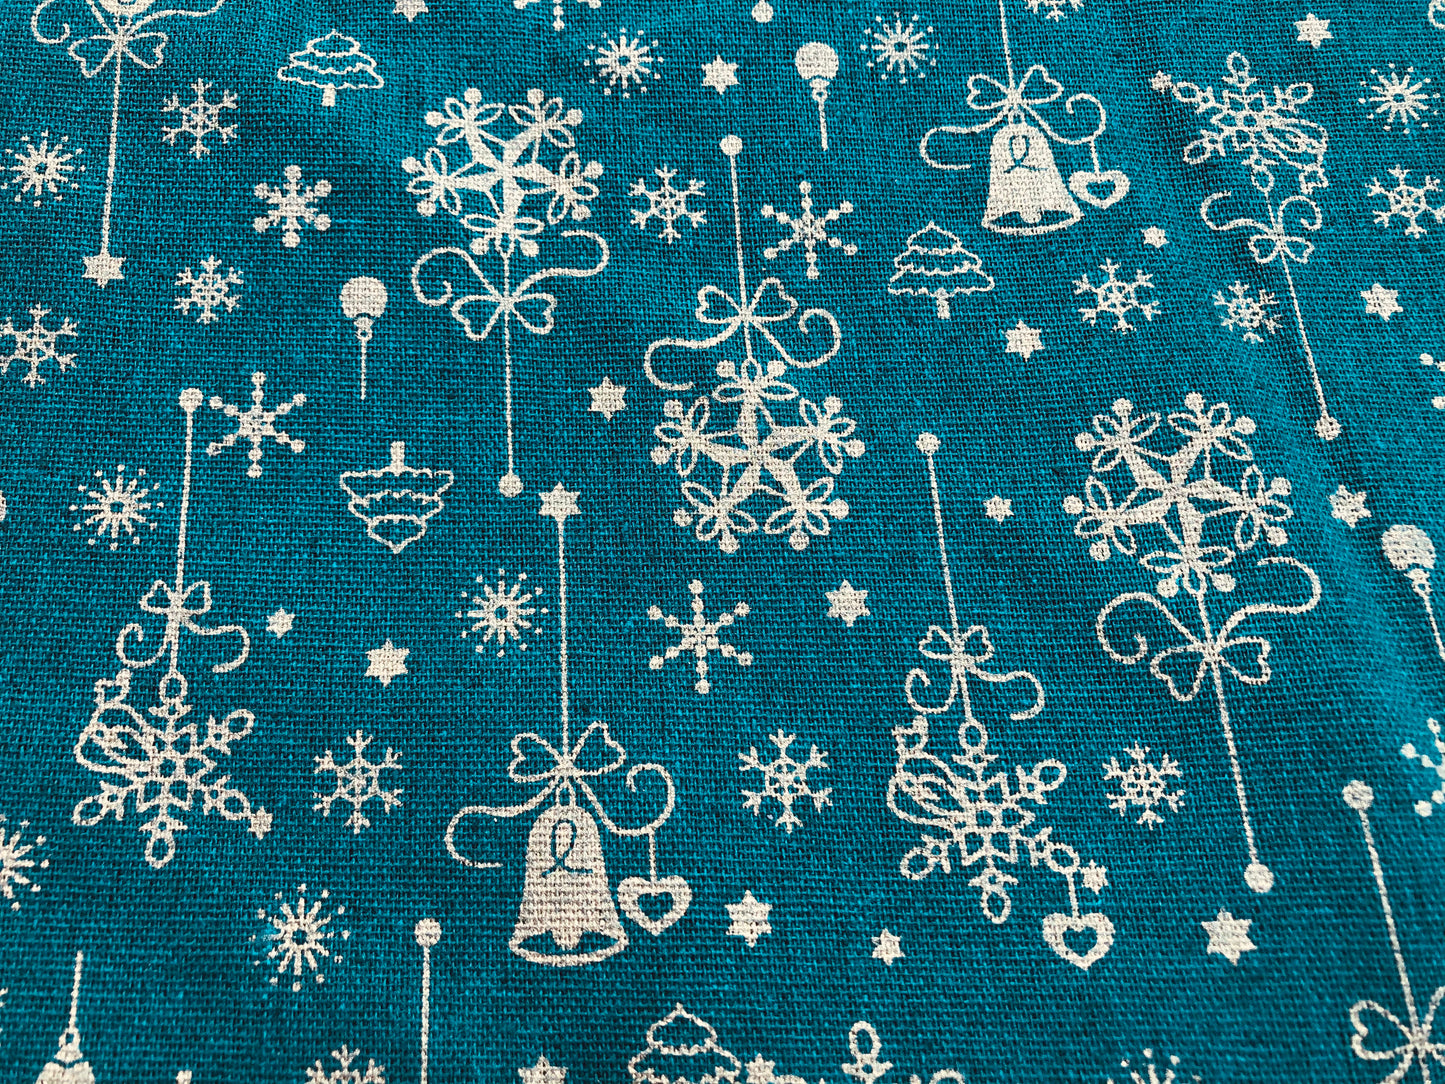 Reduce to clear Christmas fabrics, market stall tablecloth, 300cm x 150cm piece